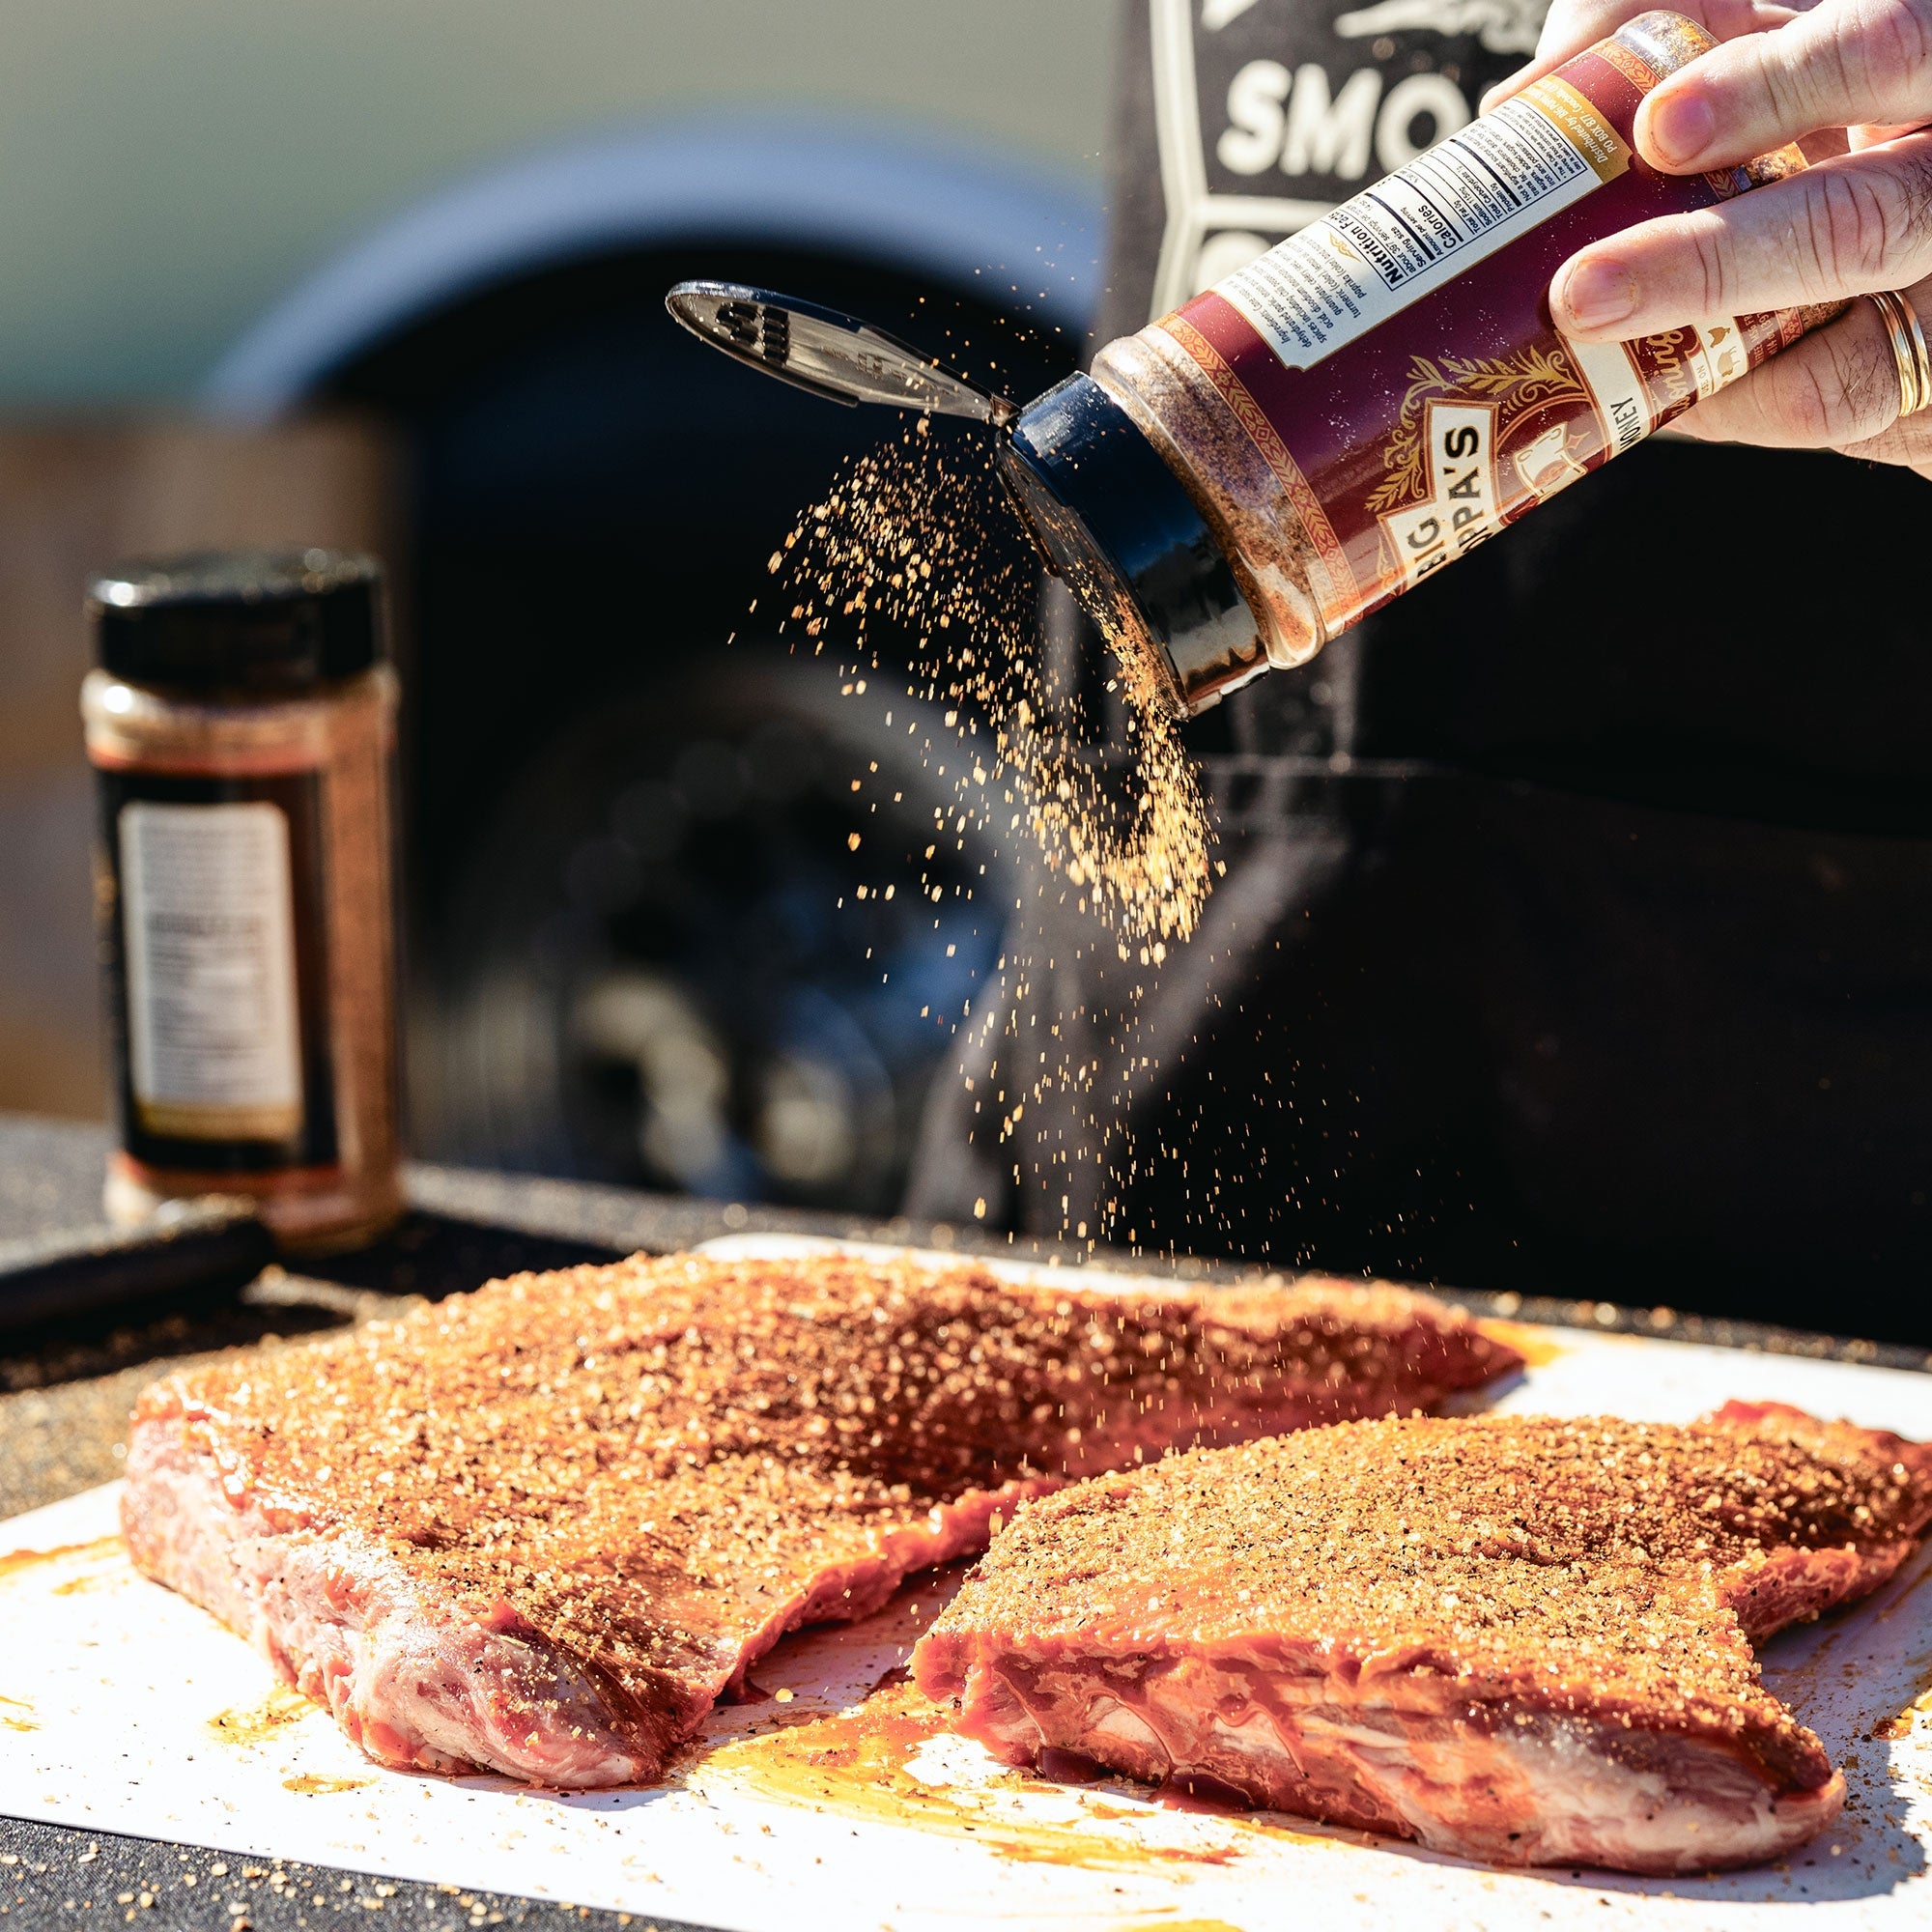 Big Poppa sprinkling Double Secret Steak Seasoning on two tri-tips pieces of meat that are generously coated.